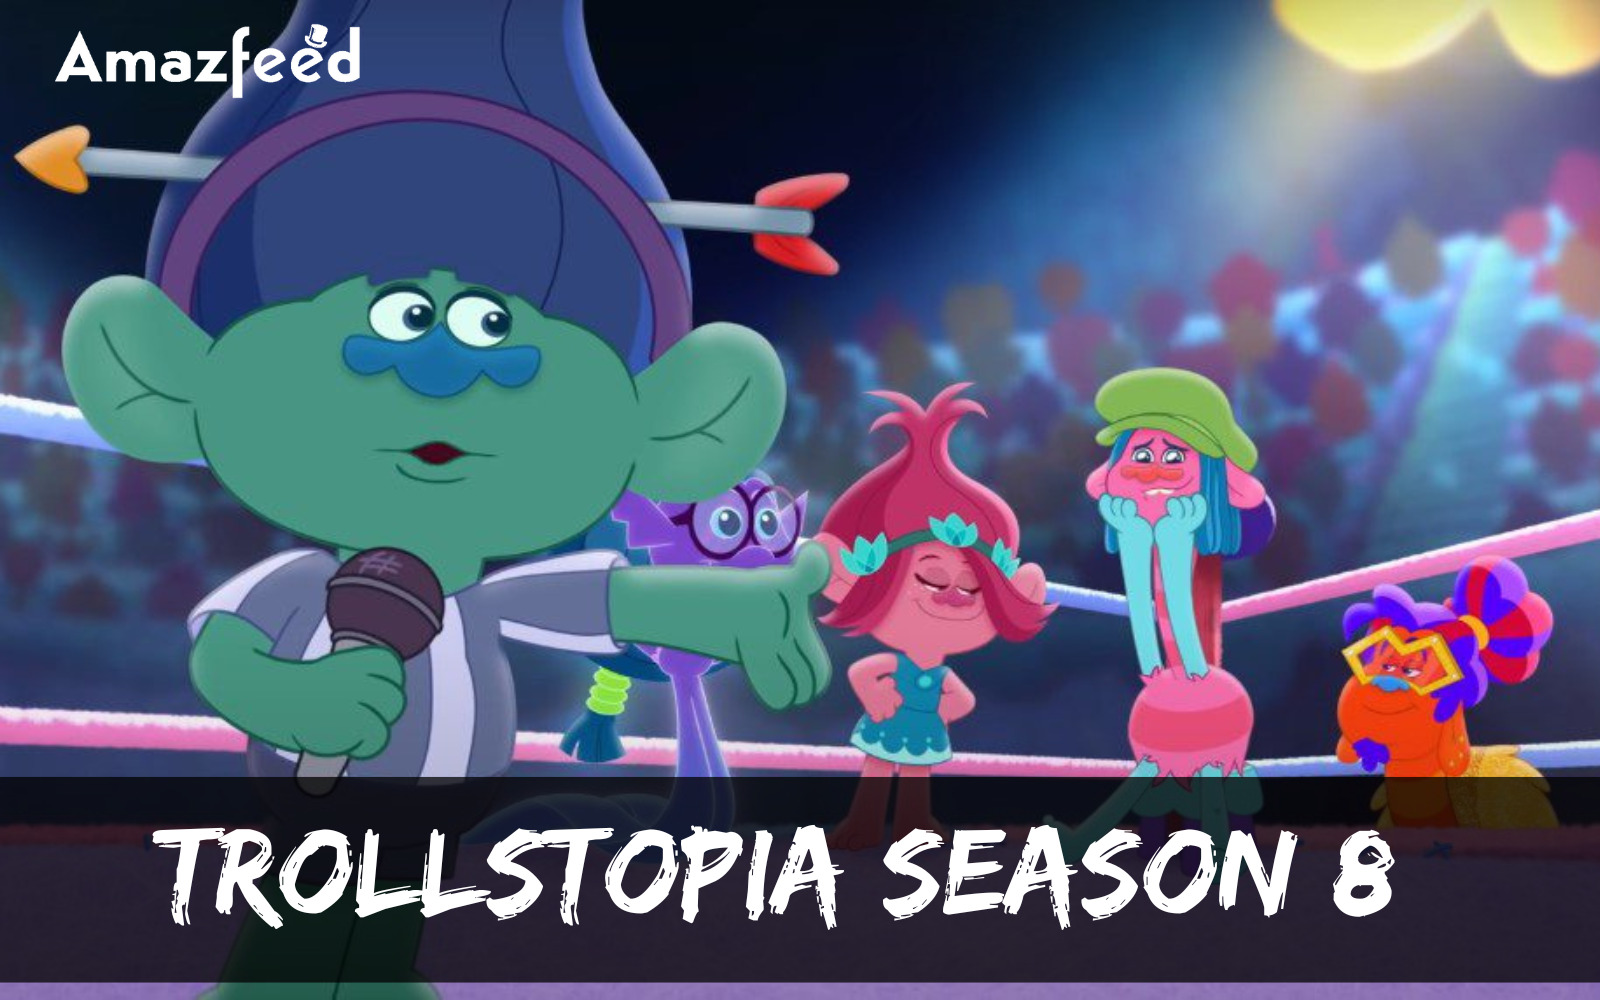 How Many Episodes Will Trollstopia Season 8 Have